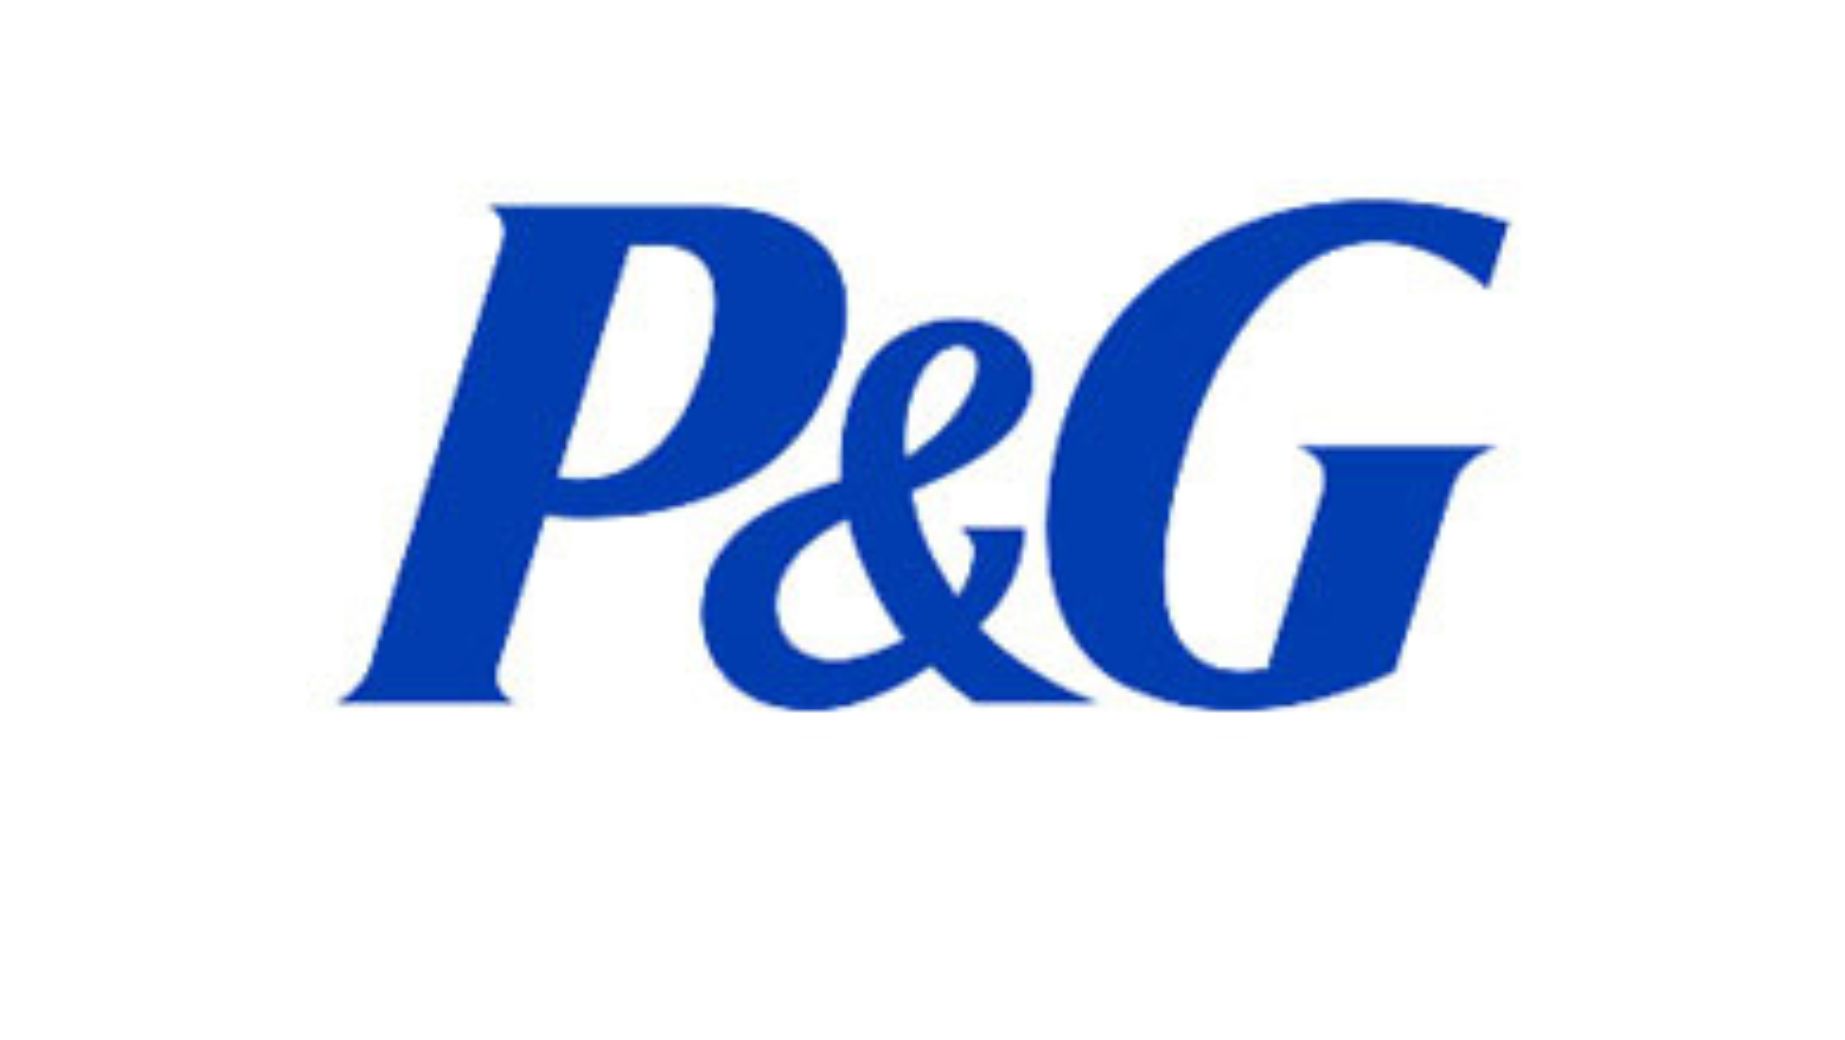 companies like procter and gamble